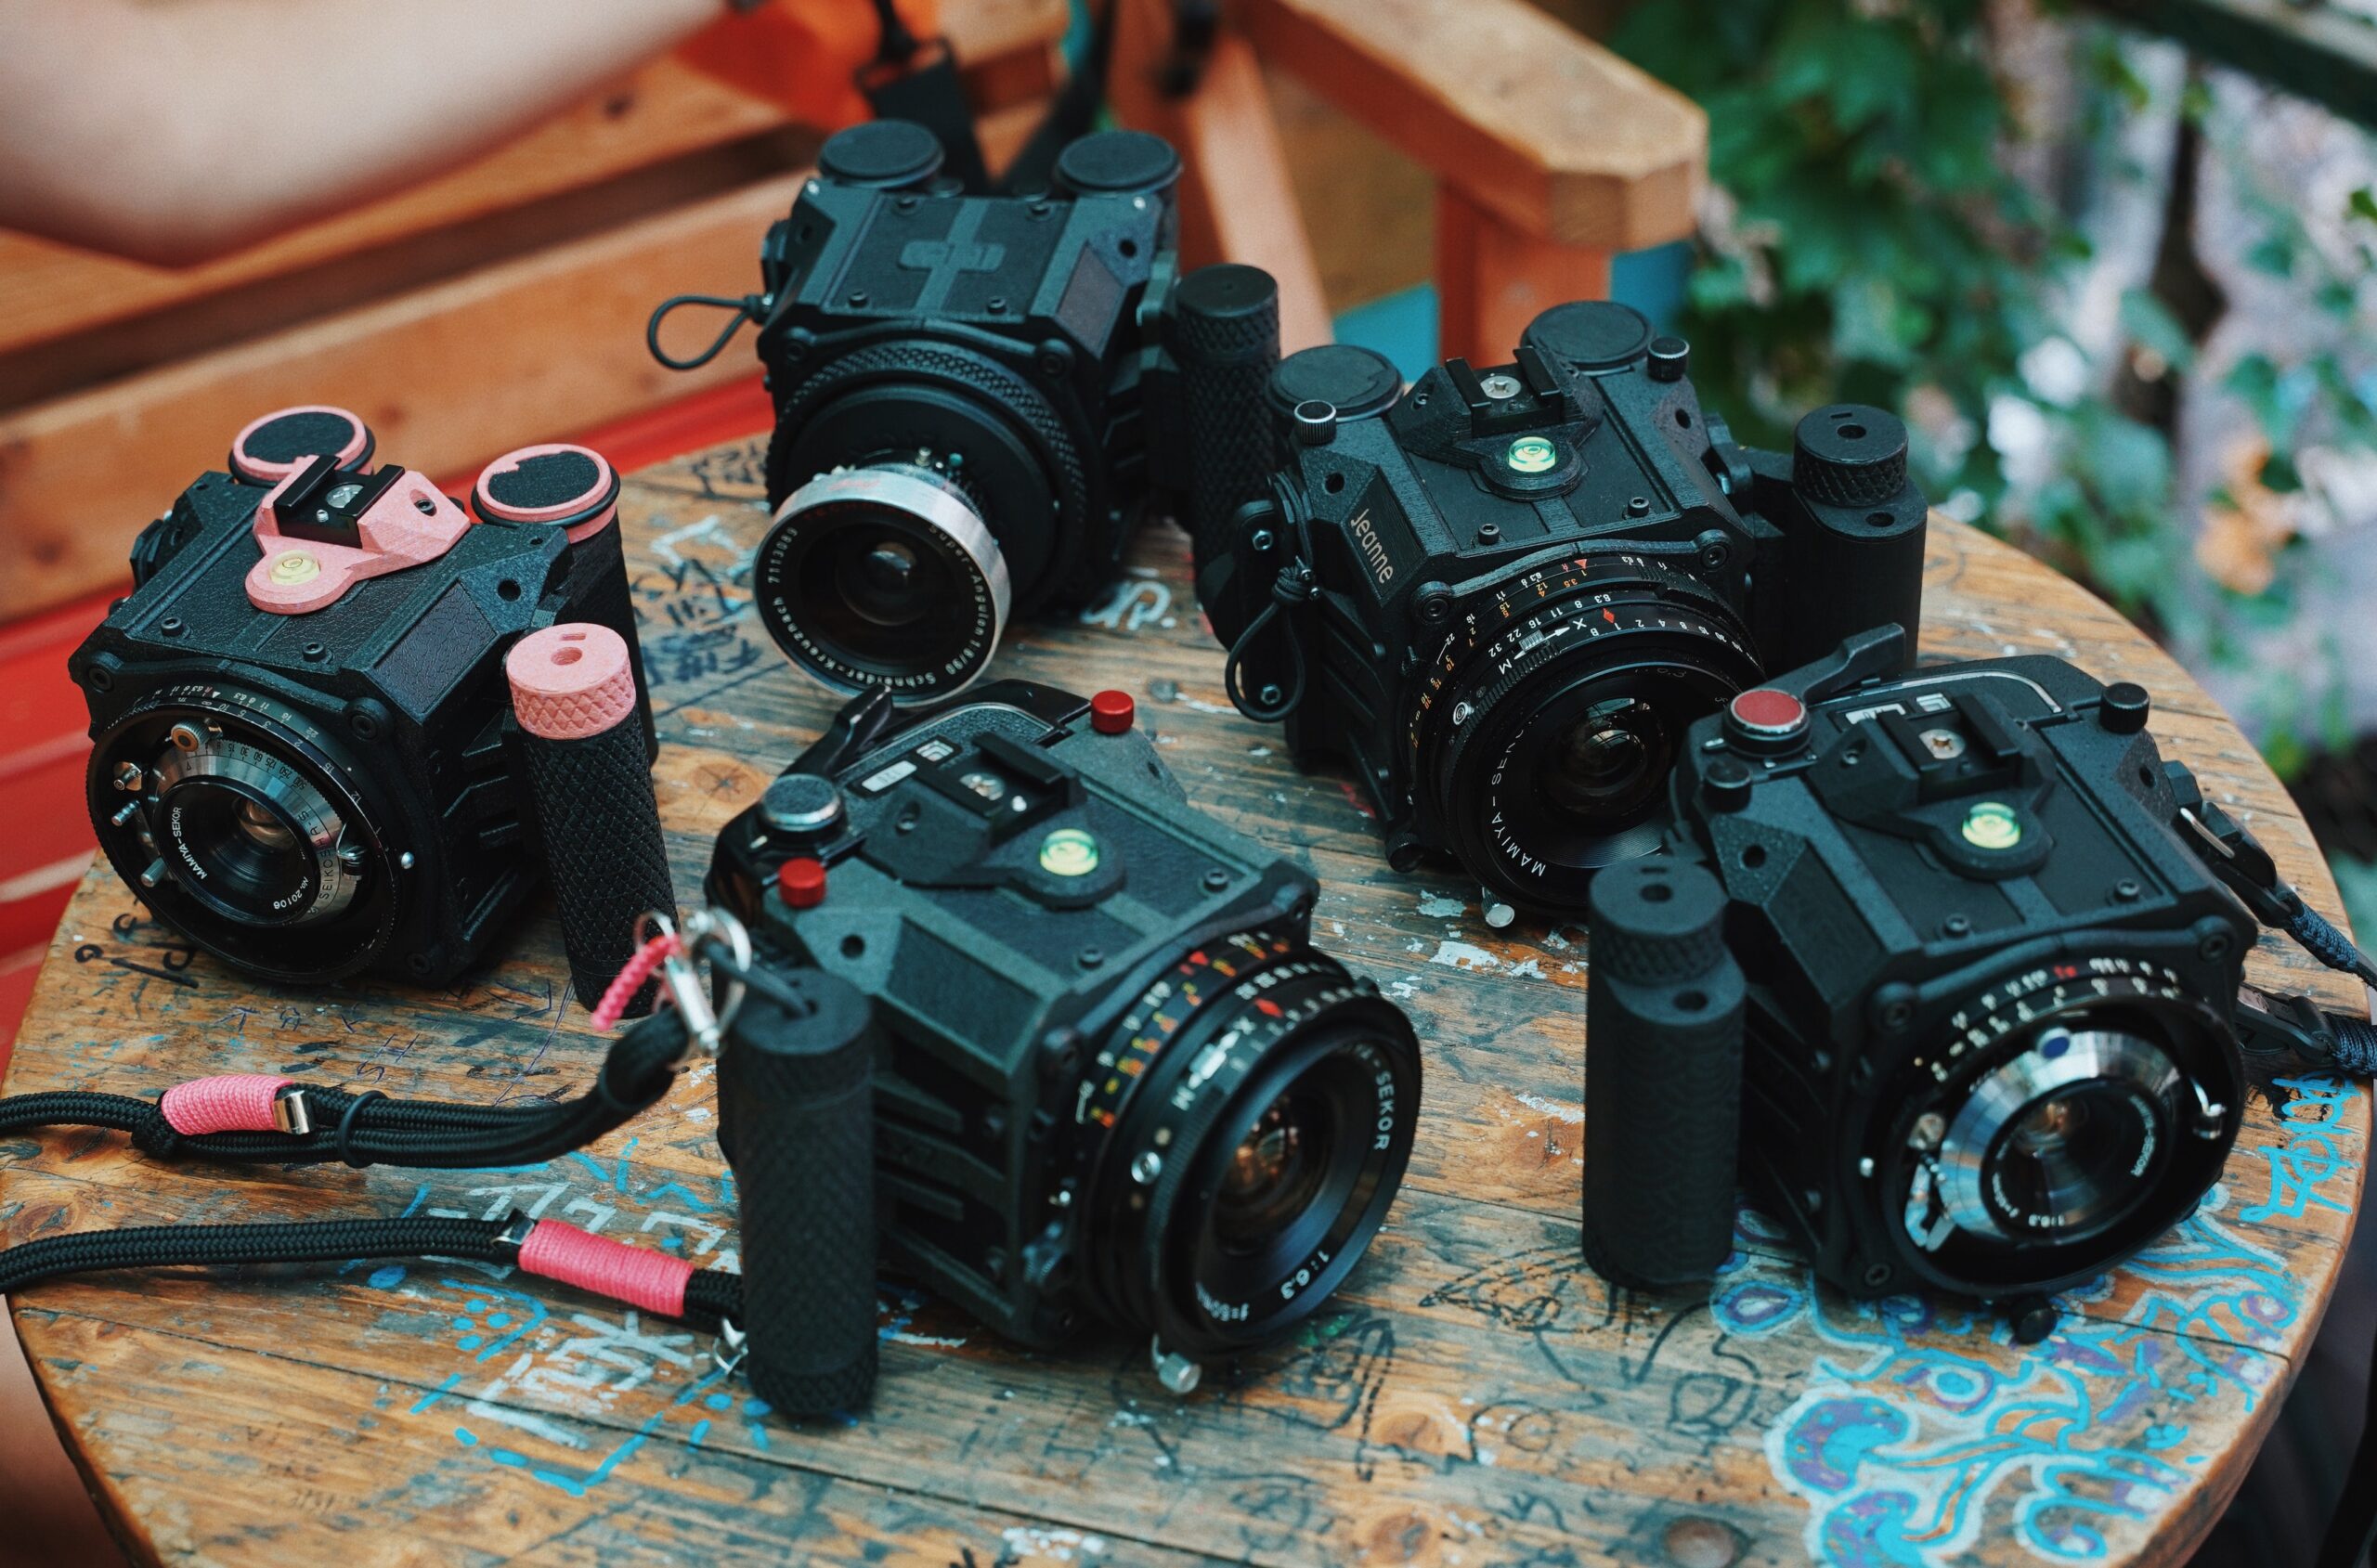 1 Camera in 9 Forms: How the Goodman Zone is Being Used by Photographers – article on PetaPixel